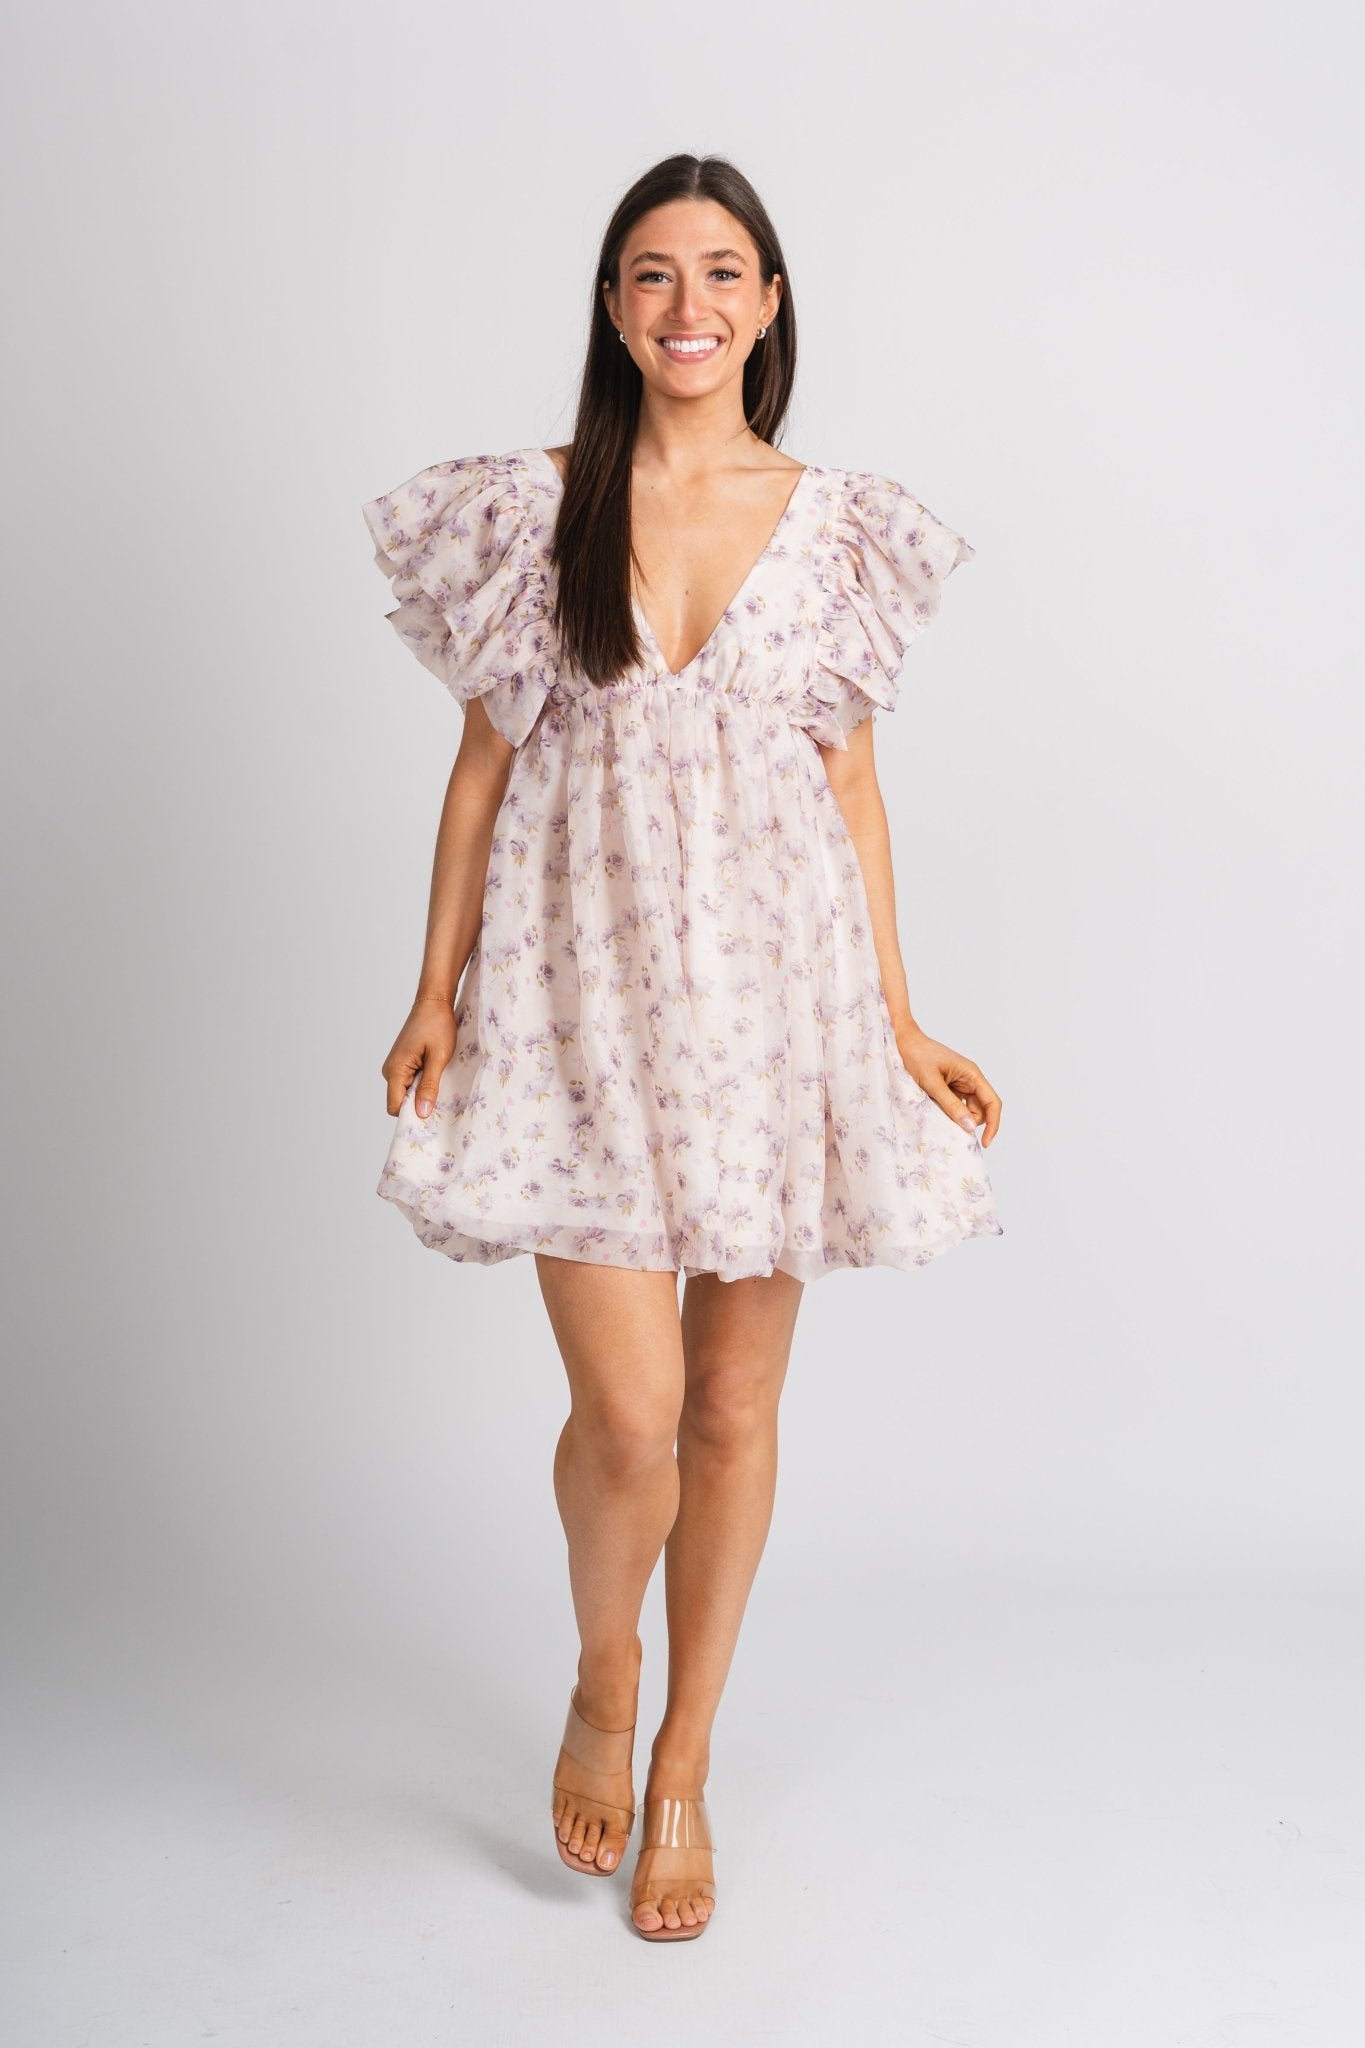 Floral baby doll dress pink floral - Cute dress - Trendy Easter Clothing Line at Lush Fashion Lounge Boutique in Oklahoma